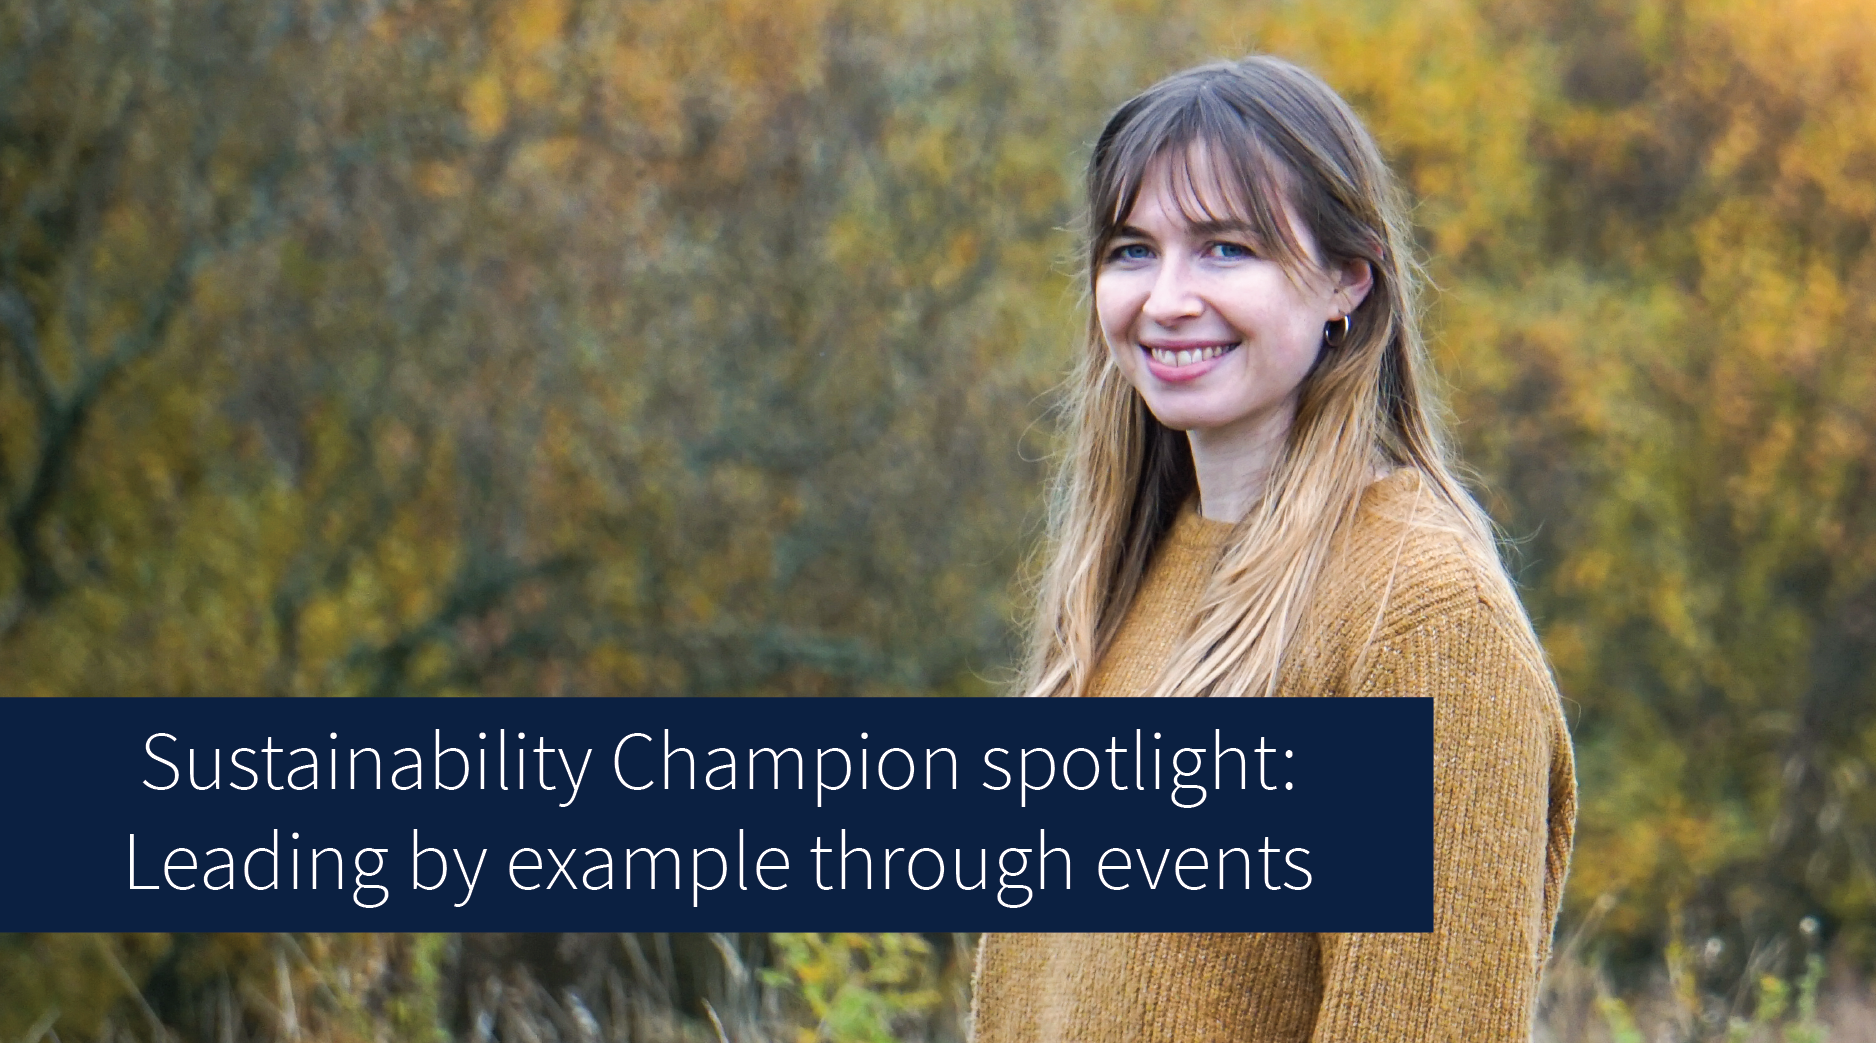 "Sustainability Champion Spotlight: Leading by example through events", Eilidh Patterson, Events, PR & Communications Administrator at the Business School